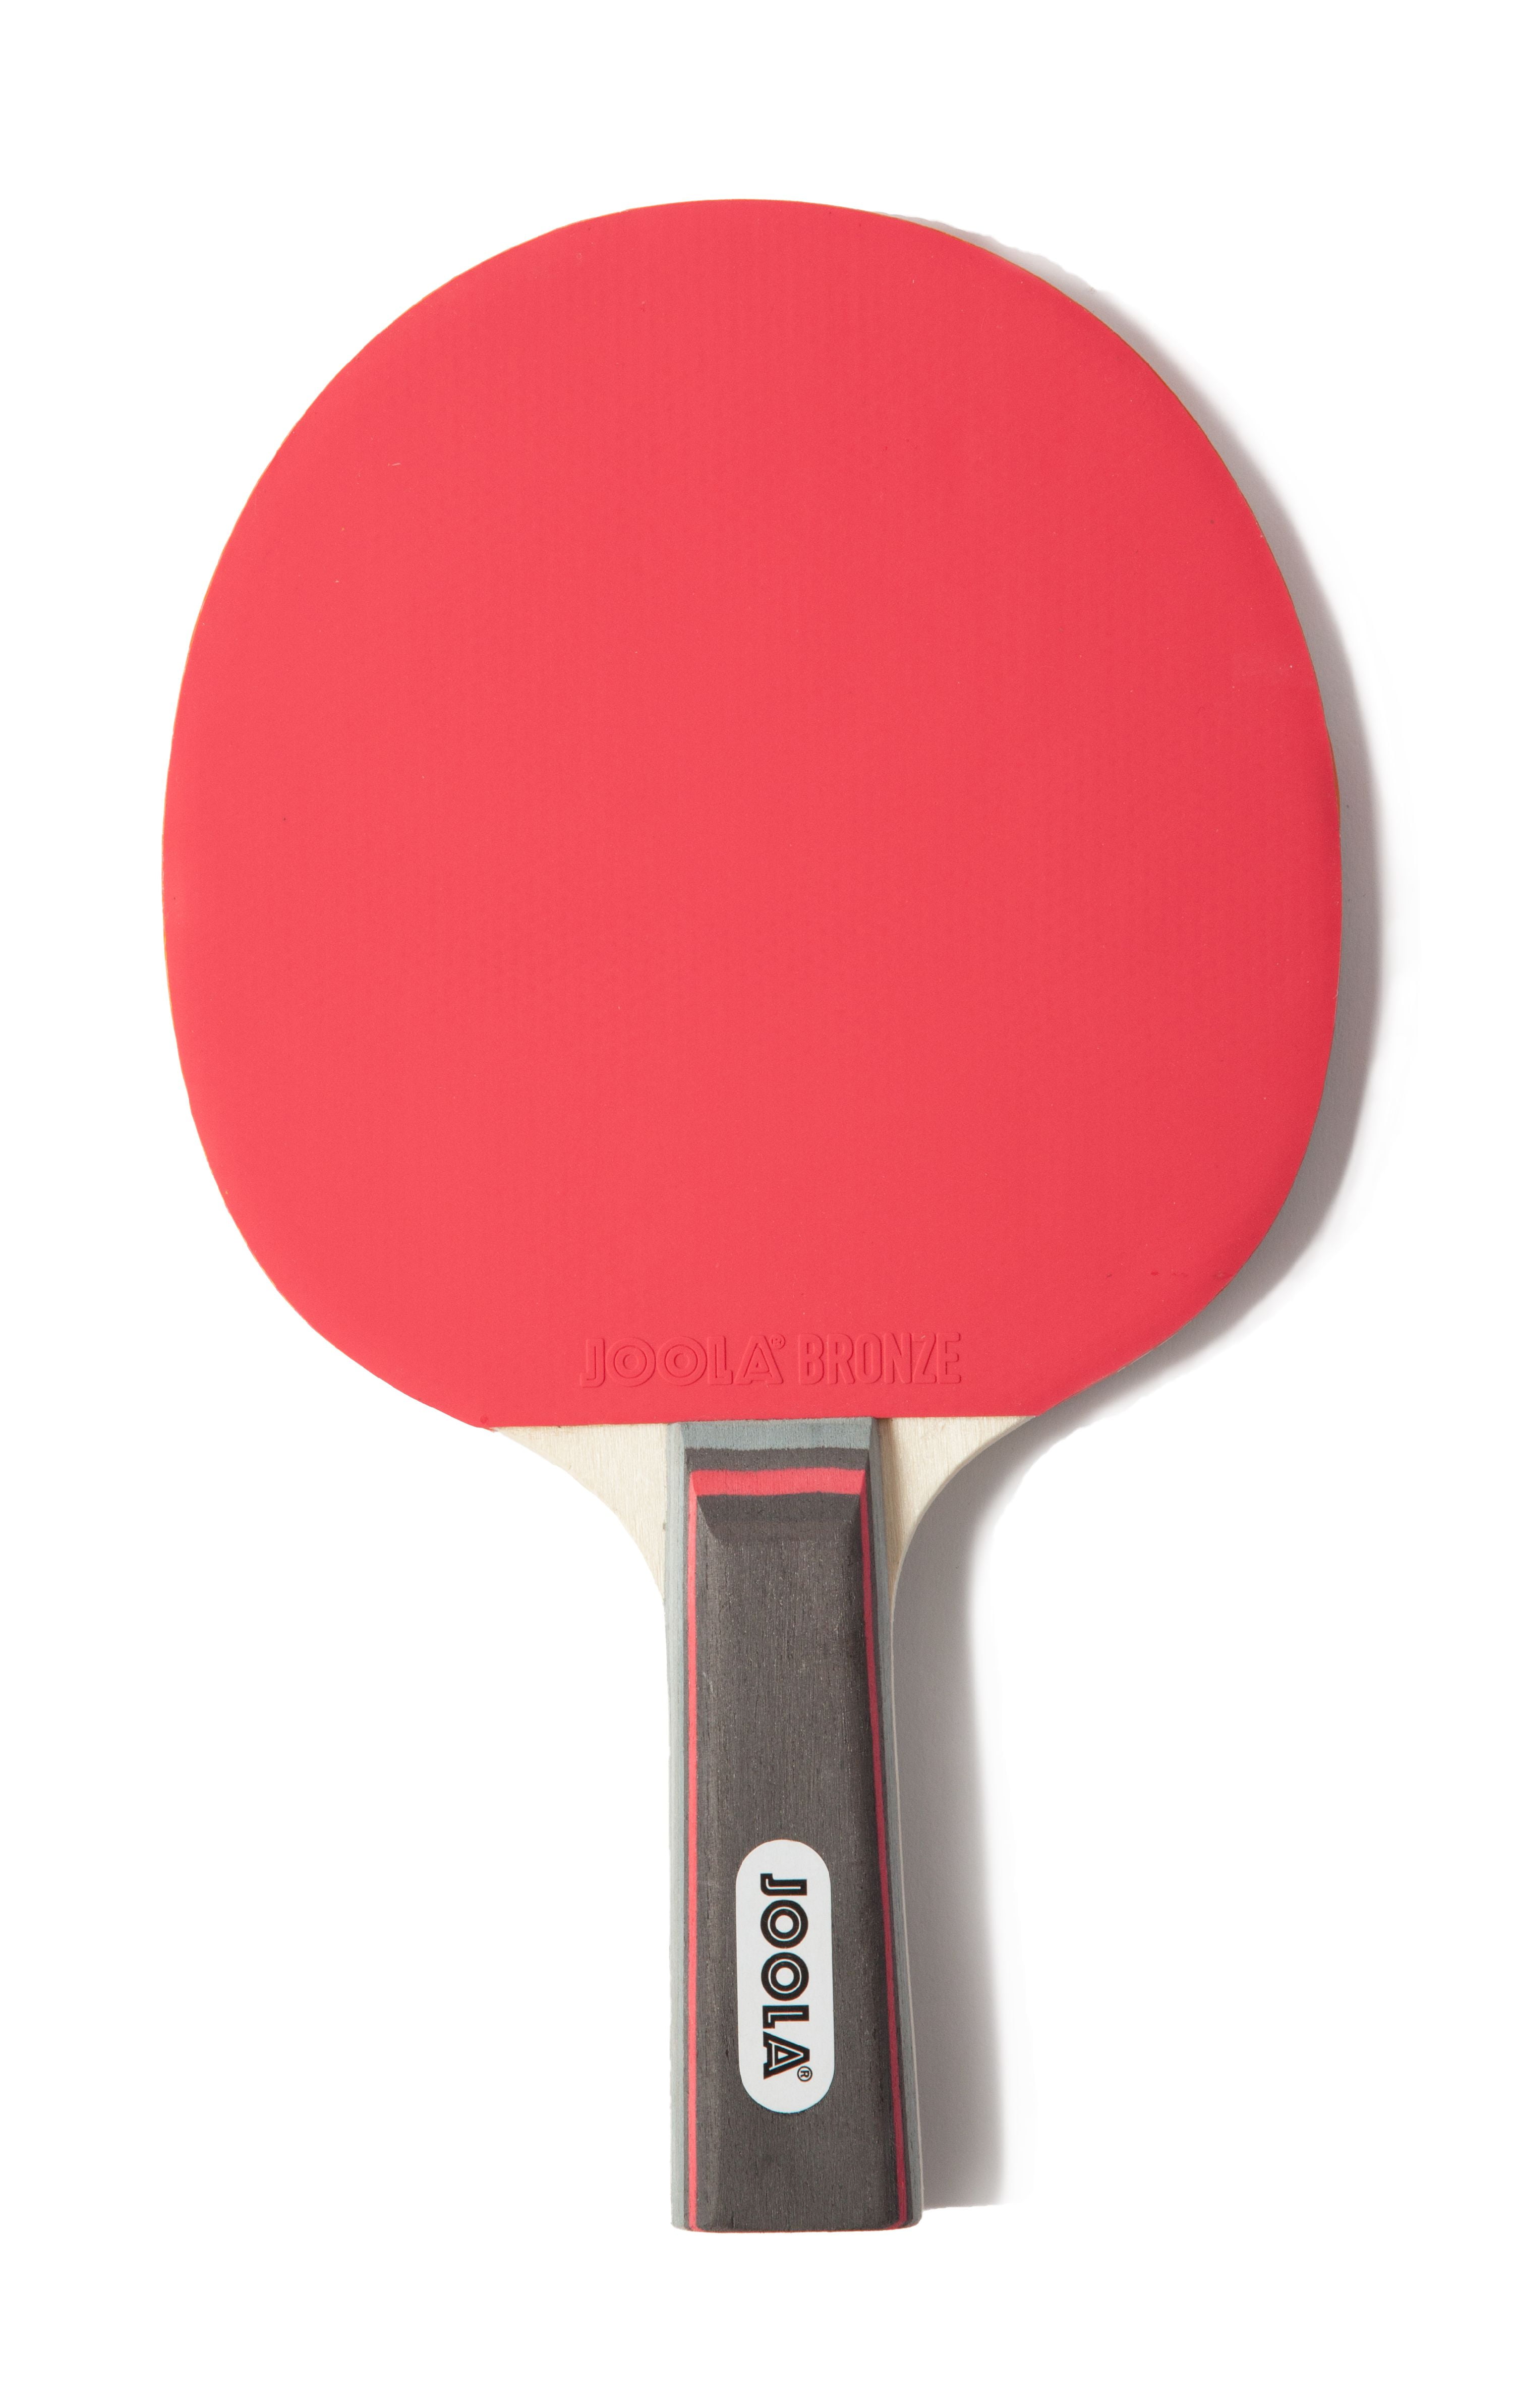 Joola Essential Series Gold 987 Gold Rated Table Tennis Racket 